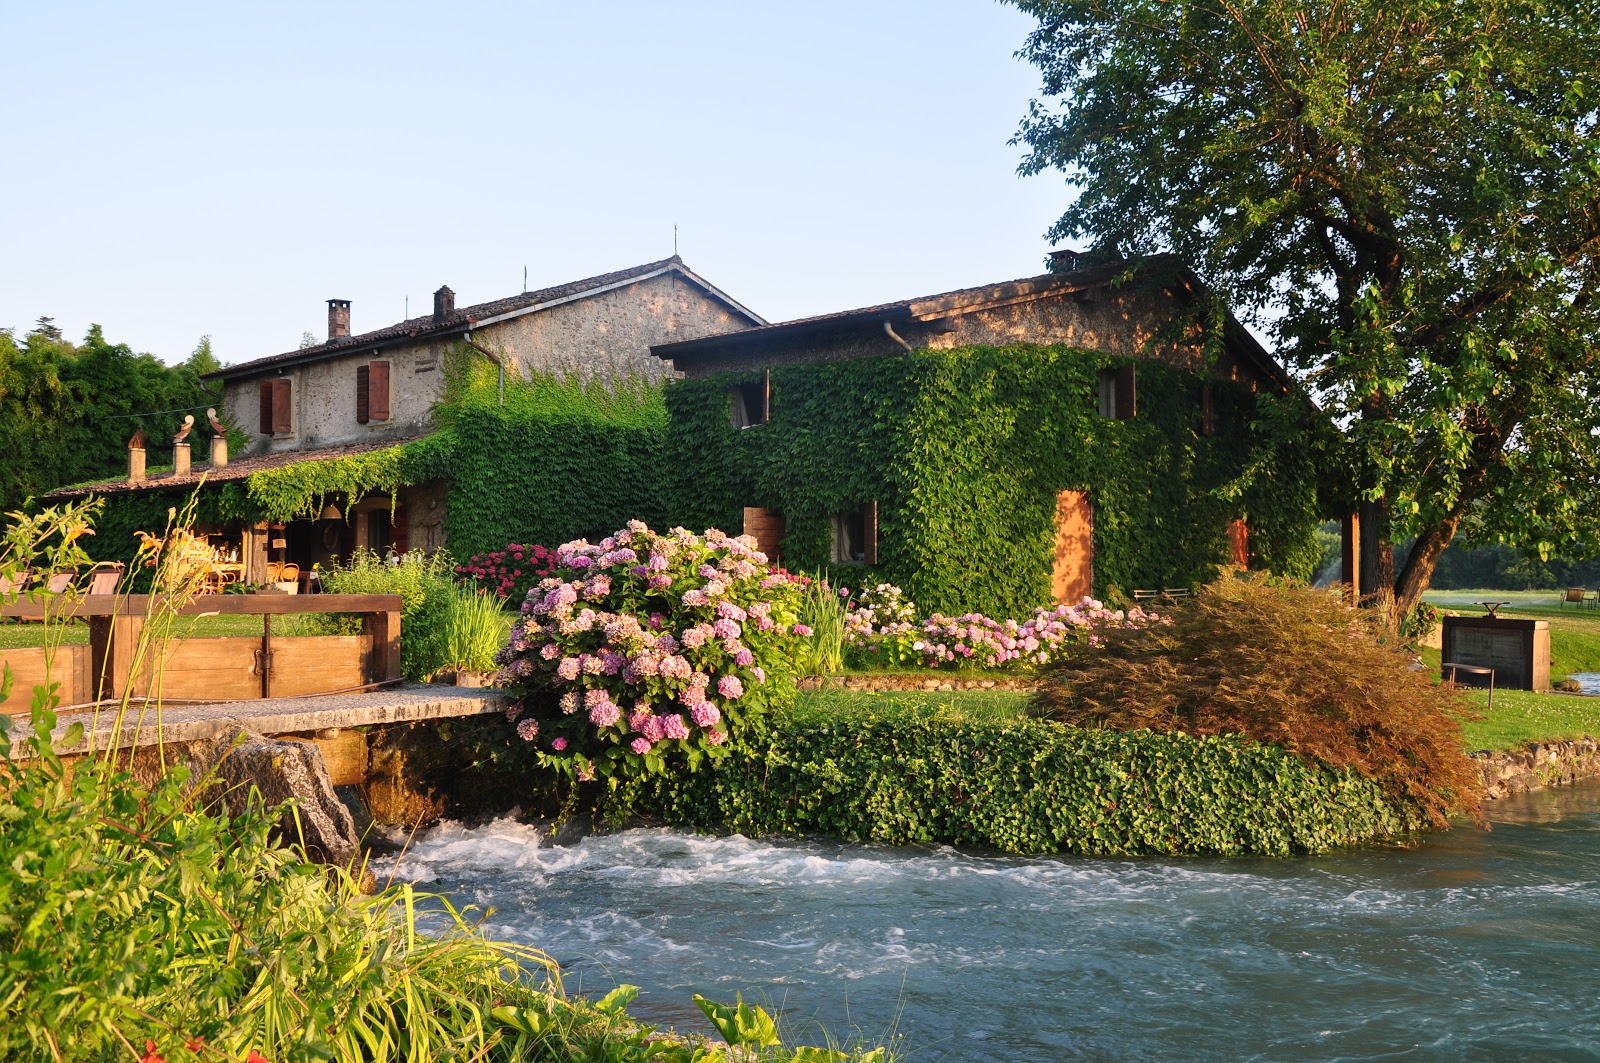 On the other side of the Visconti Bridge lies another medieval B&B, La Finestra Sul Fiume. Photo: Courtesy of La Finestra Sul Fiume.